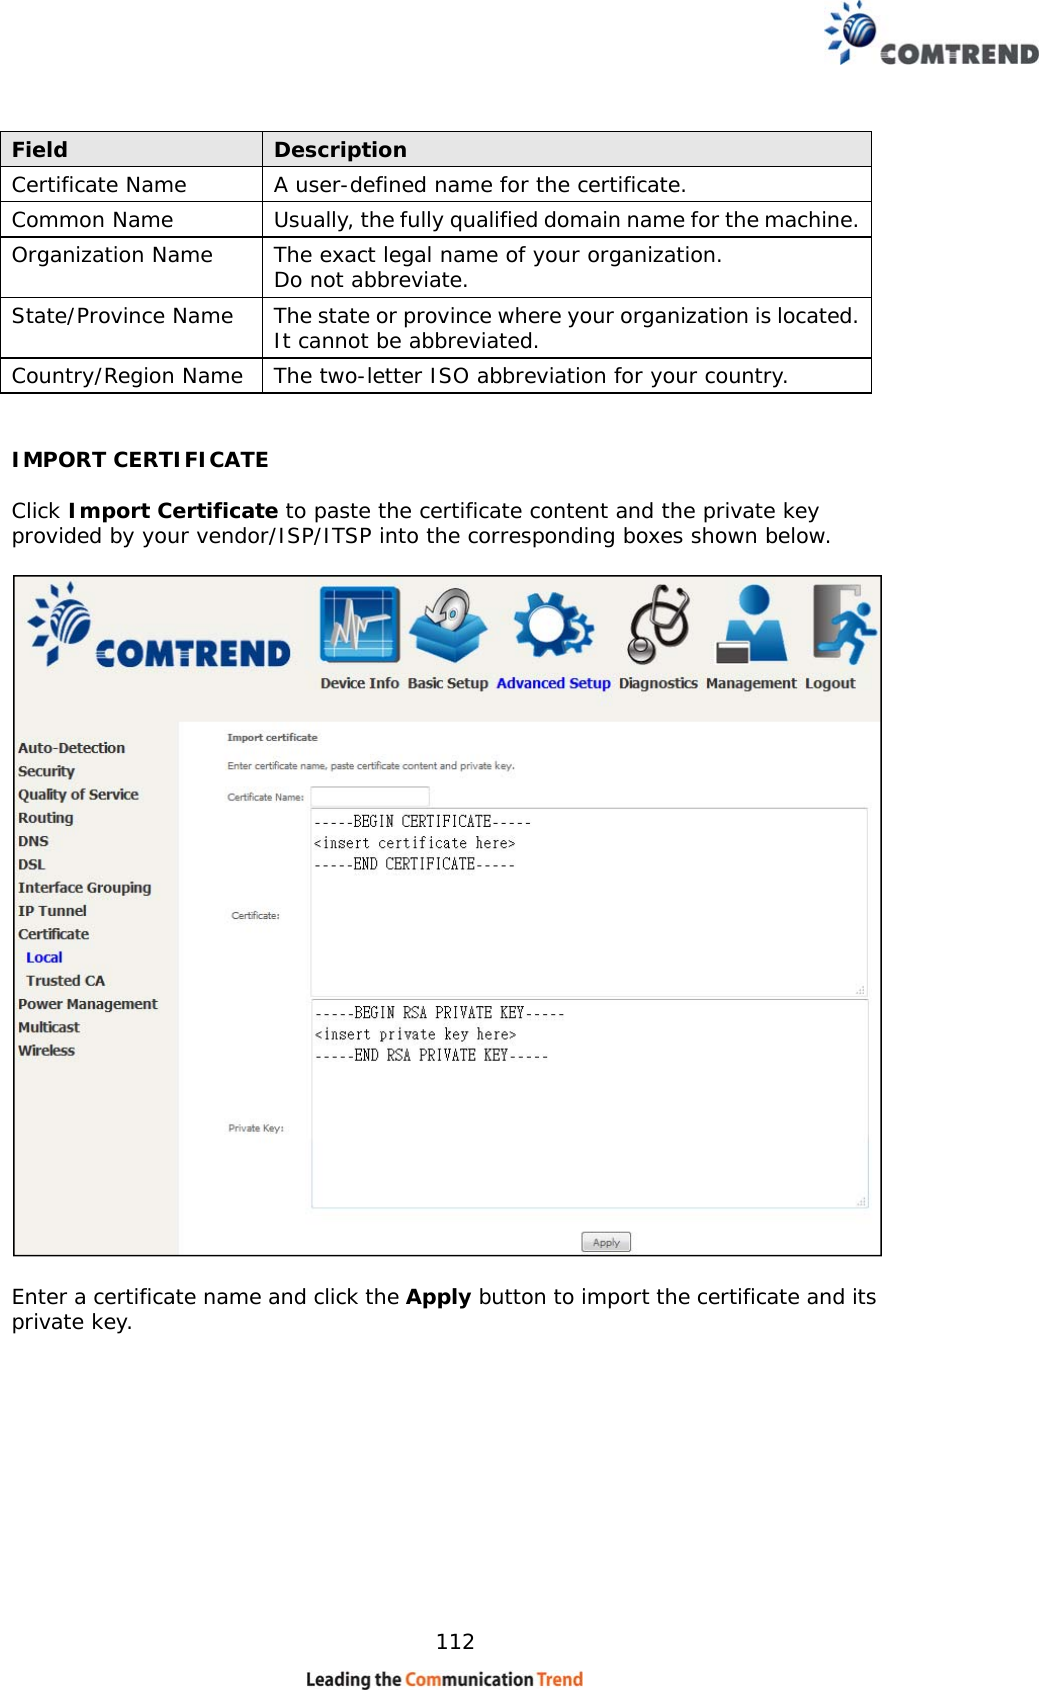    112 Field  Description Certificate Name  A user-defined name for the certificate. Common Name  Usually, the fully qualified domain name for the machine.  Organization Name  The exact legal name of your organization.  Do not abbreviate. State/Province Name  The state or province where your organization is located.  It cannot be abbreviated. Country/Region Name  The two-letter ISO abbreviation for your country.  IMPORT CERTIFICATE  Click Import Certificate to paste the certificate content and the private key provided by your vendor/ISP/ITSP into the corresponding boxes shown below.    Enter a certificate name and click the Apply button to import the certificate and its private key.  